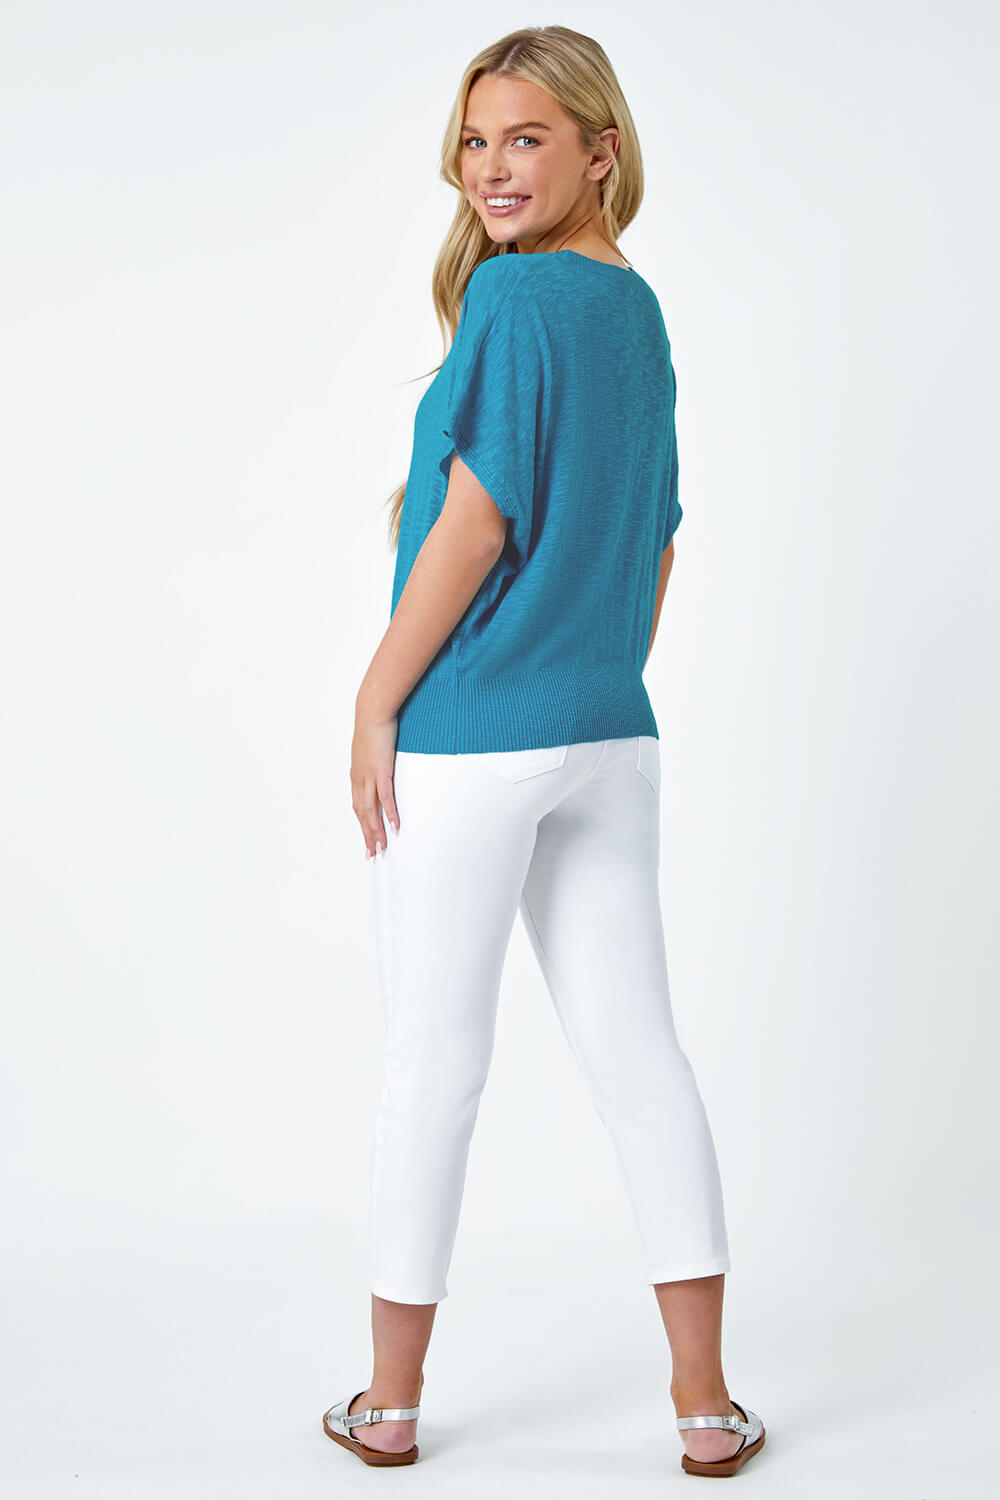 Turquoise Petite Cotton Blend Textured Knit Top, Image 3 of 5